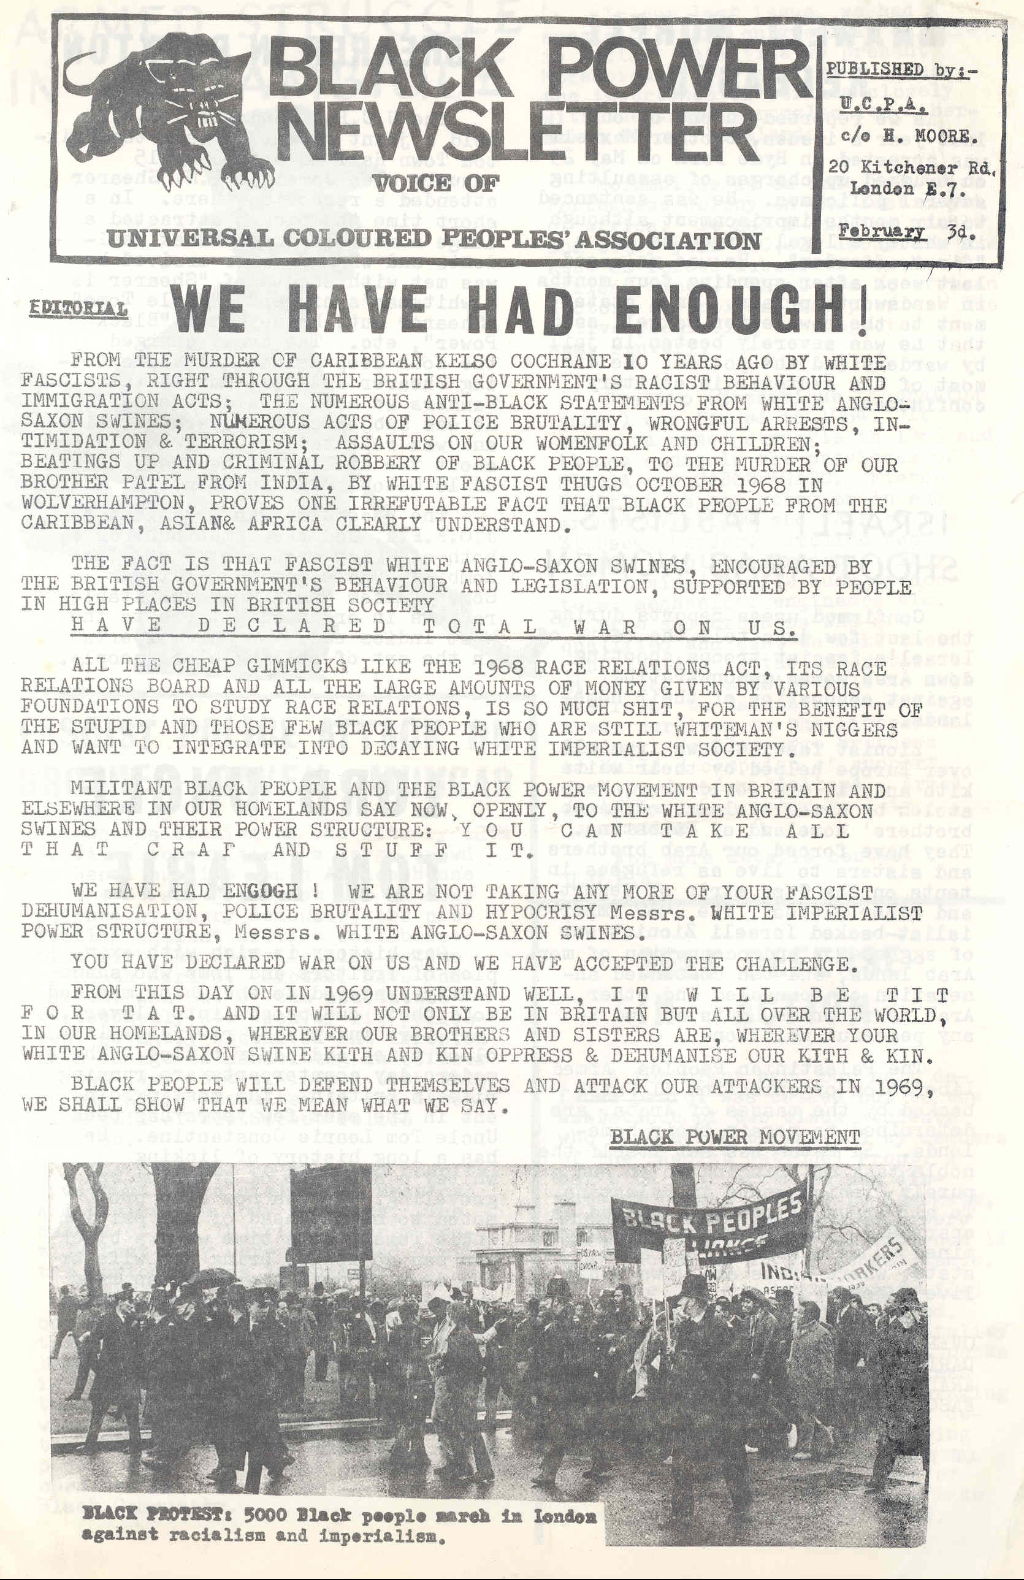 'Black Power Newsletter: Voice of the Universal Coloured Peoples' Association', February 1969